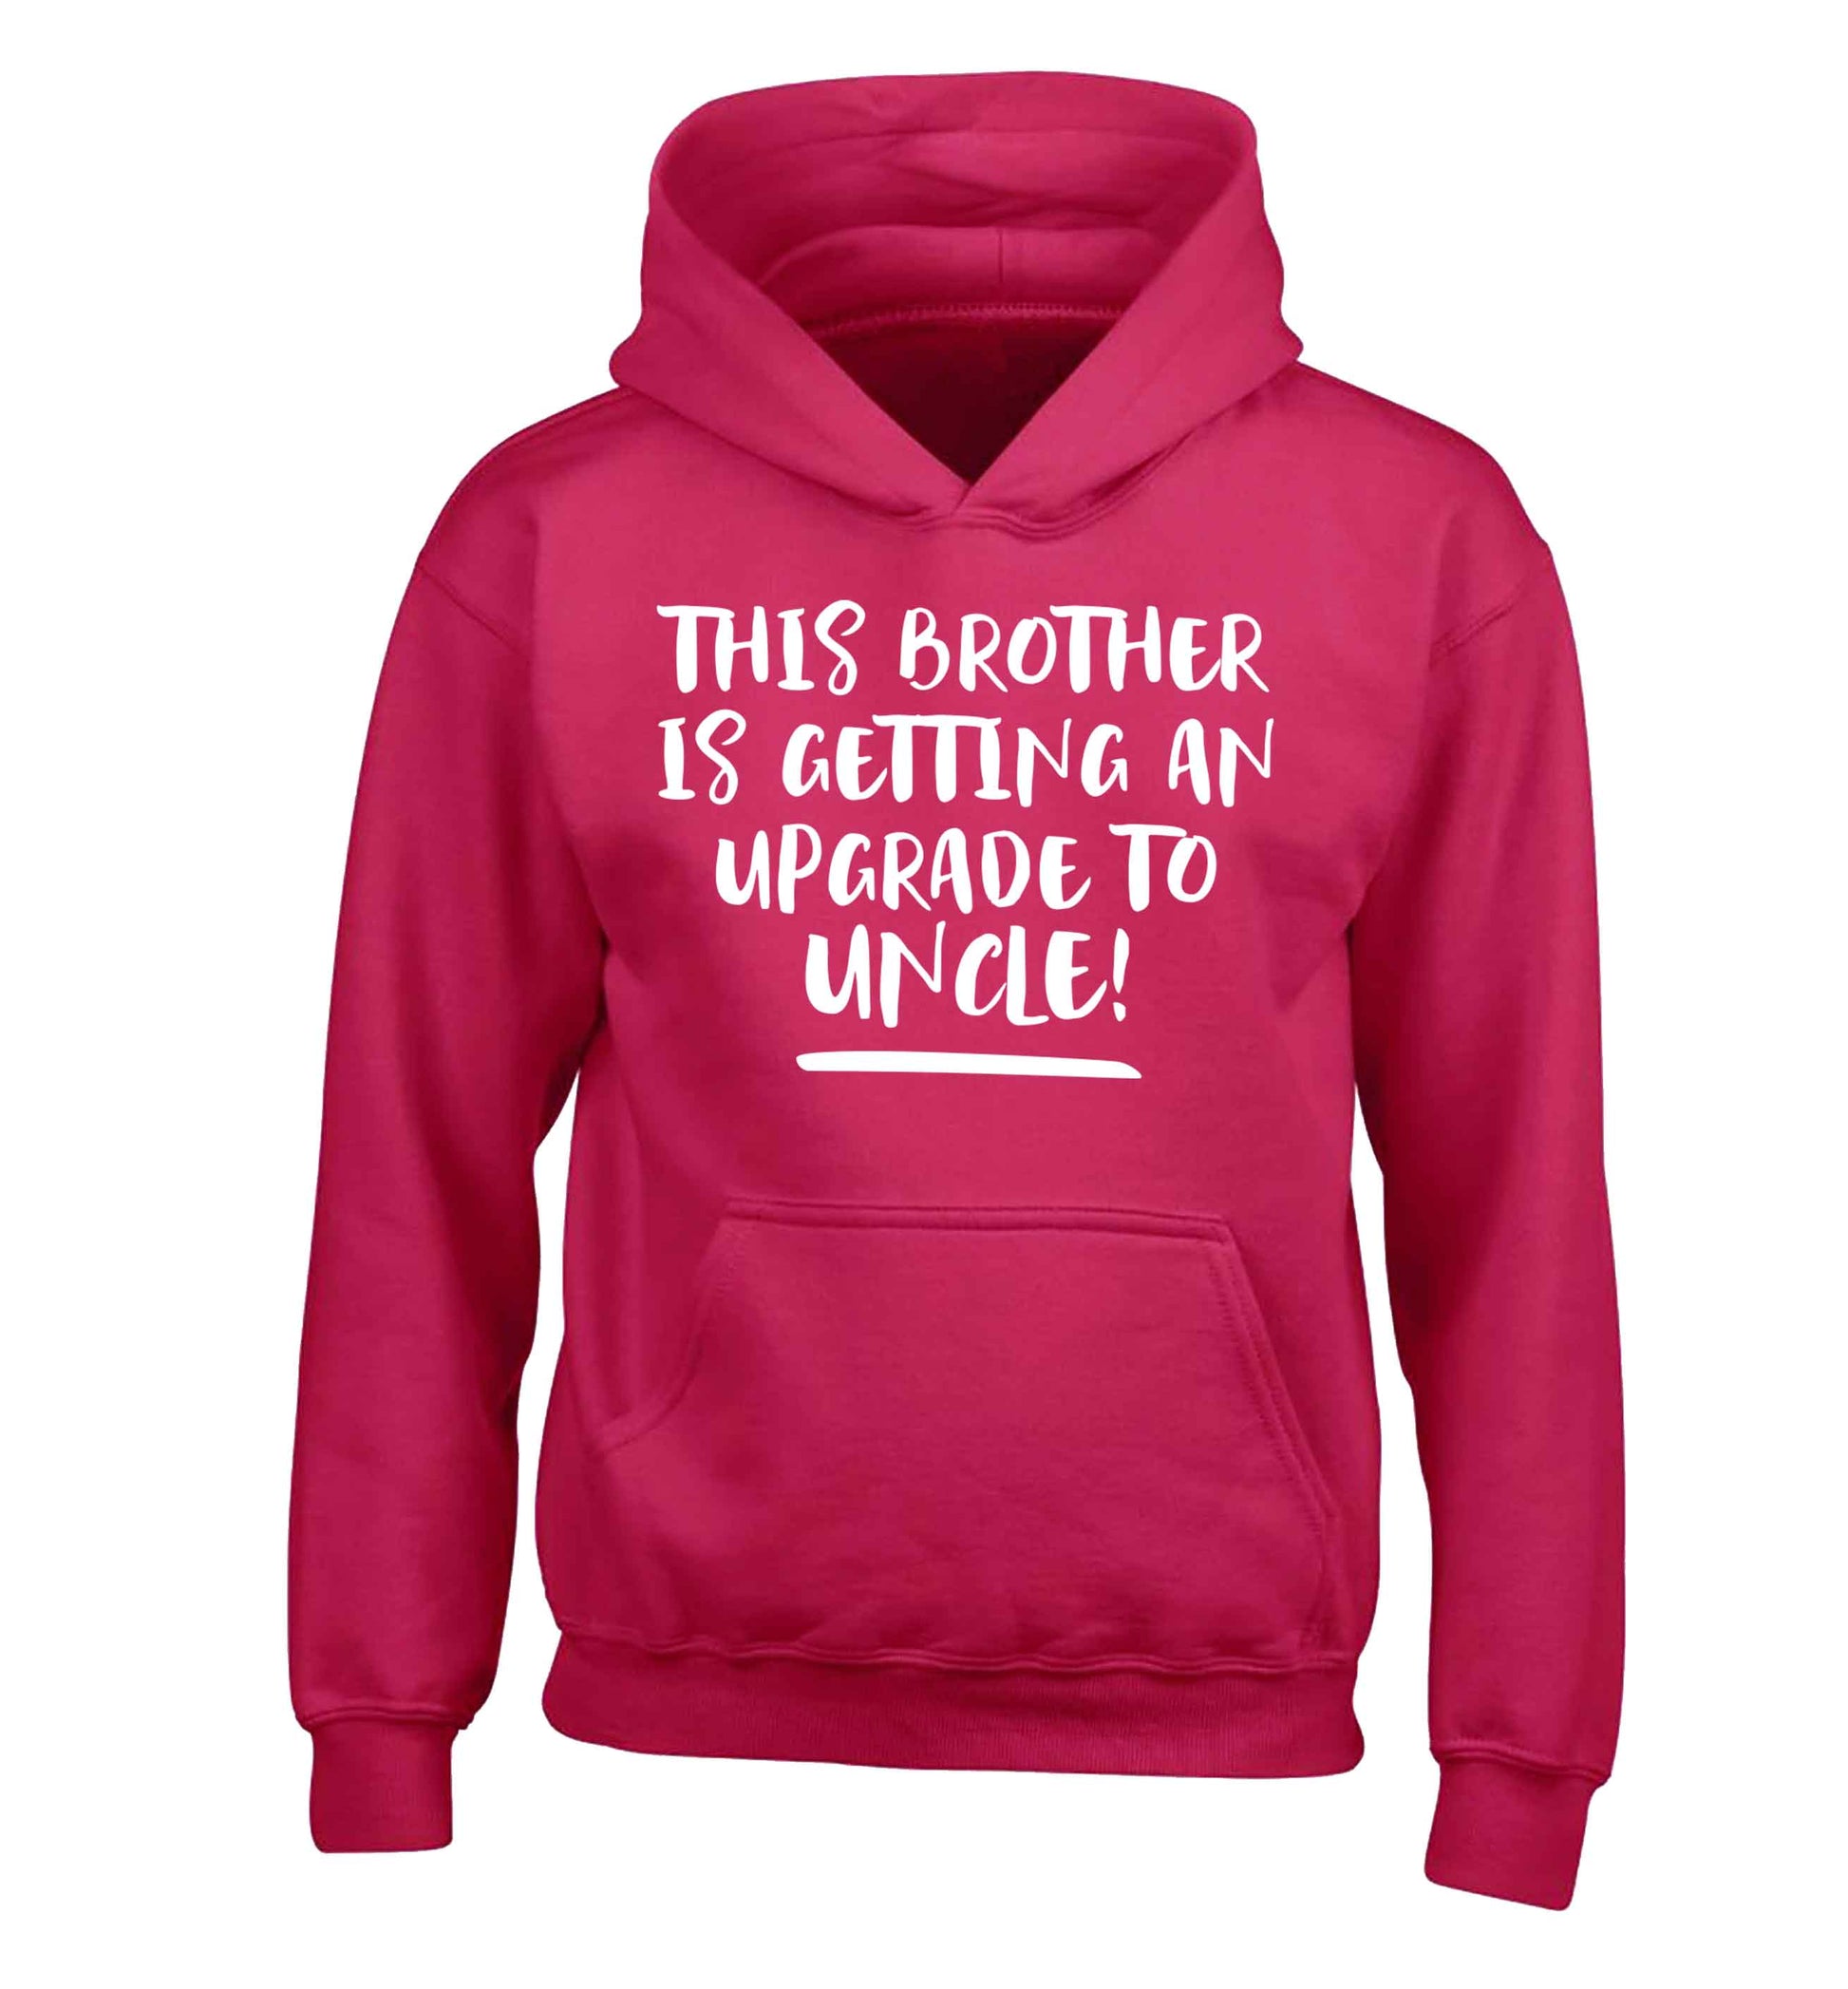 This brother is getting an upgrade to uncle! children's pink hoodie 12-13 Years